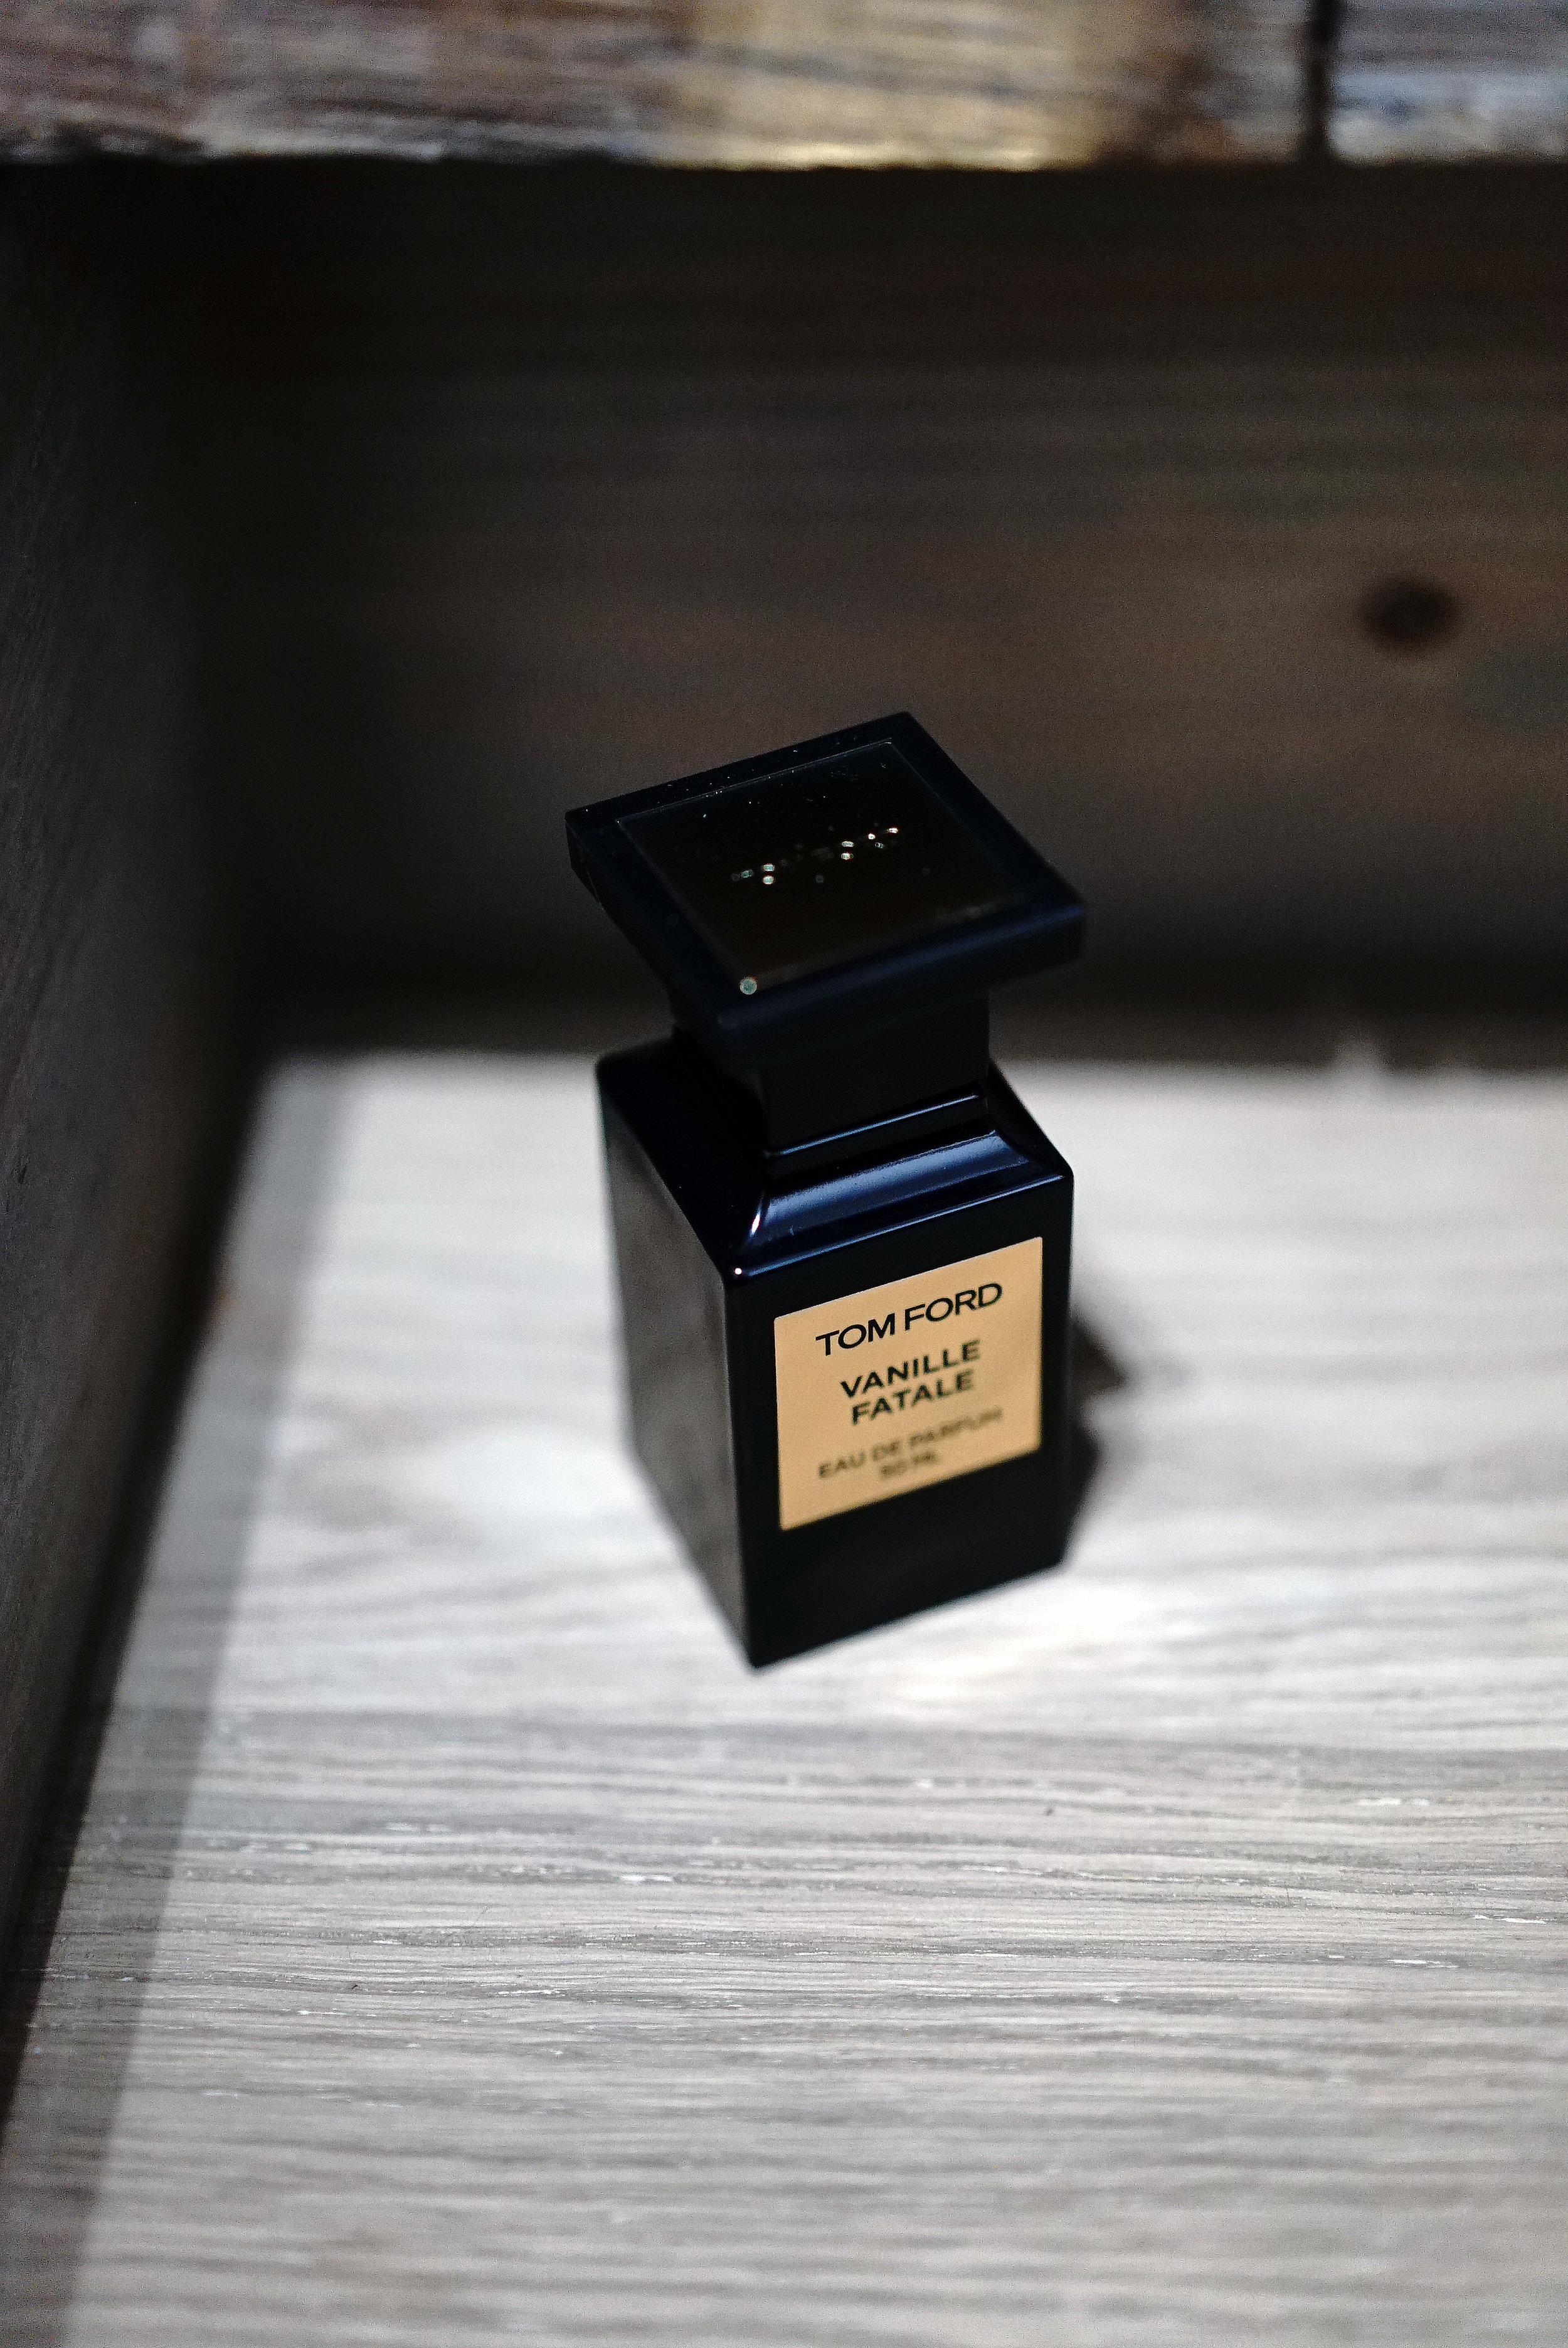 Best Scents 2018 | The Vanille Fatale Fragrance from Tom Ford Beauty ...